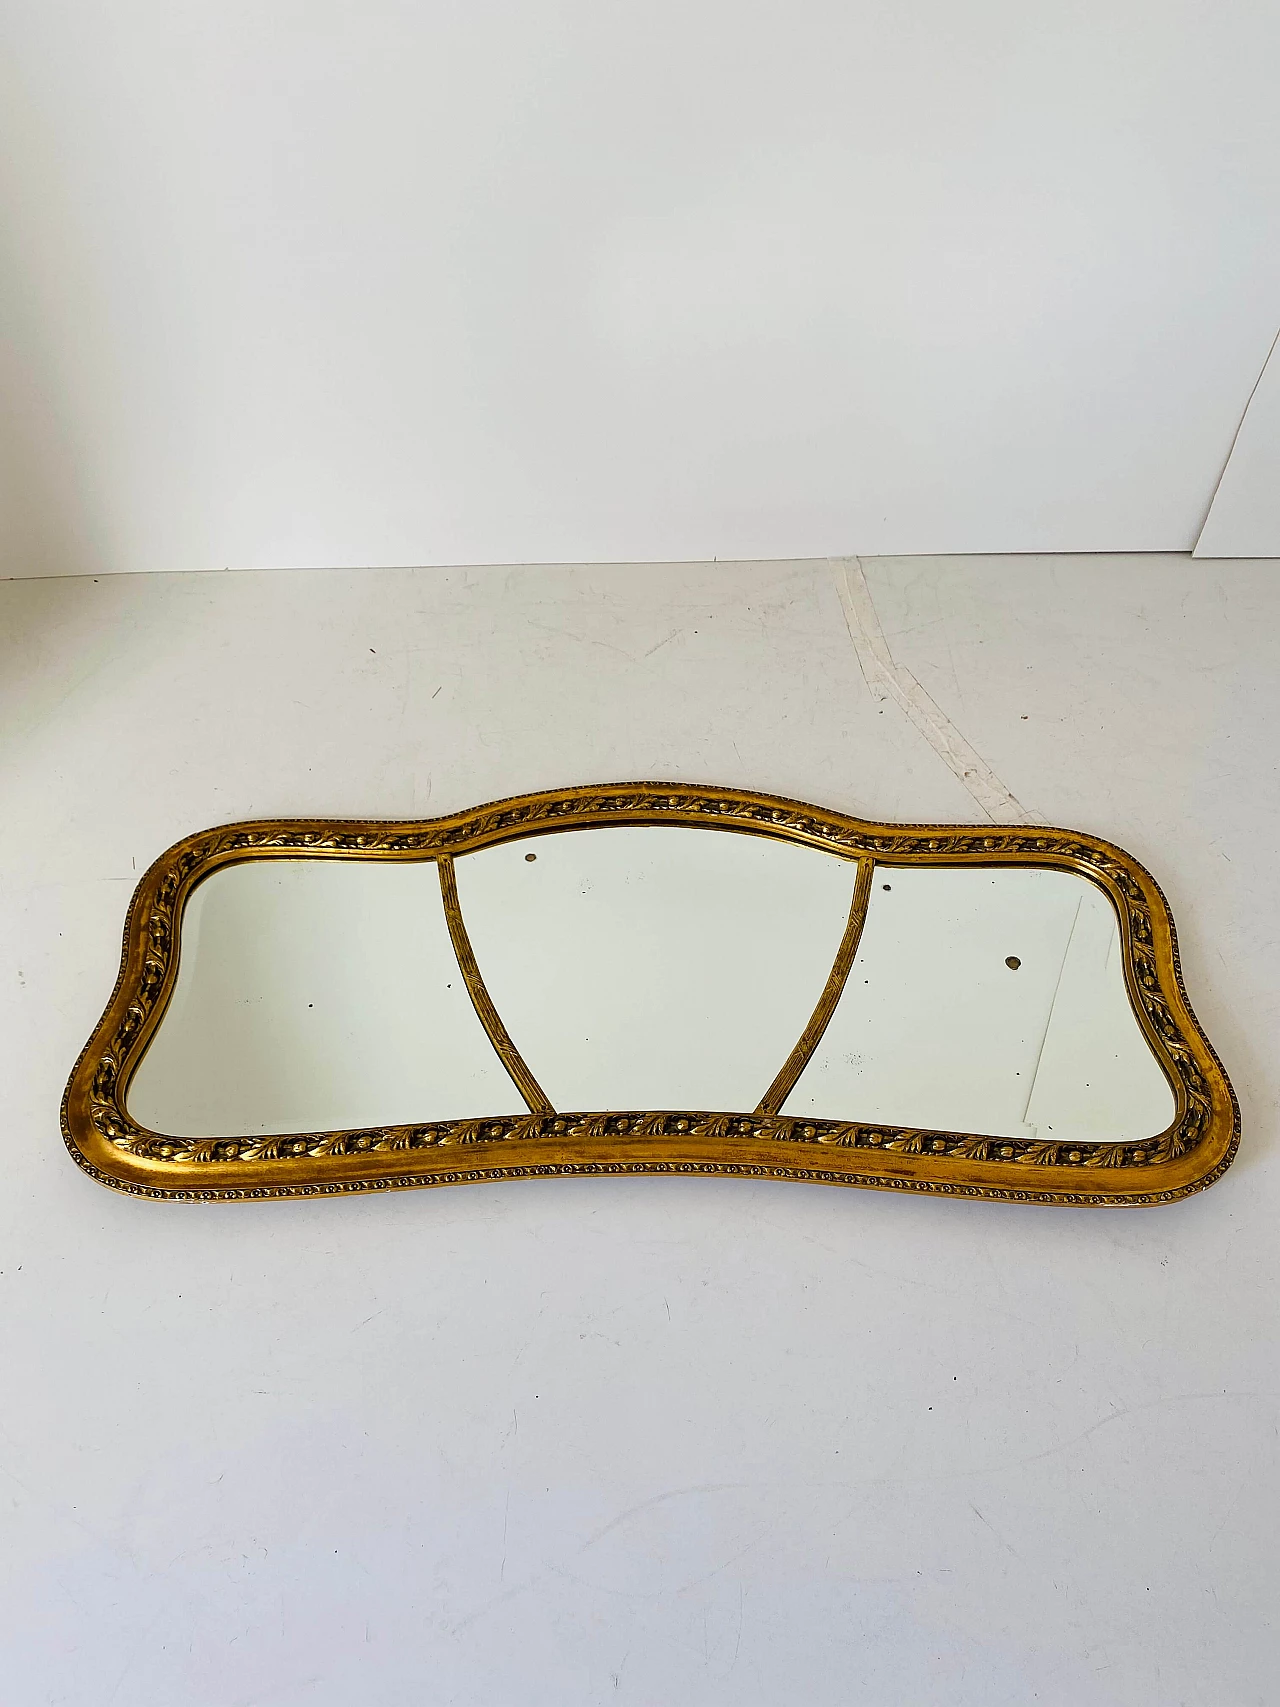 Solid wood mirror with gold leaf finish, mid-19th century 1